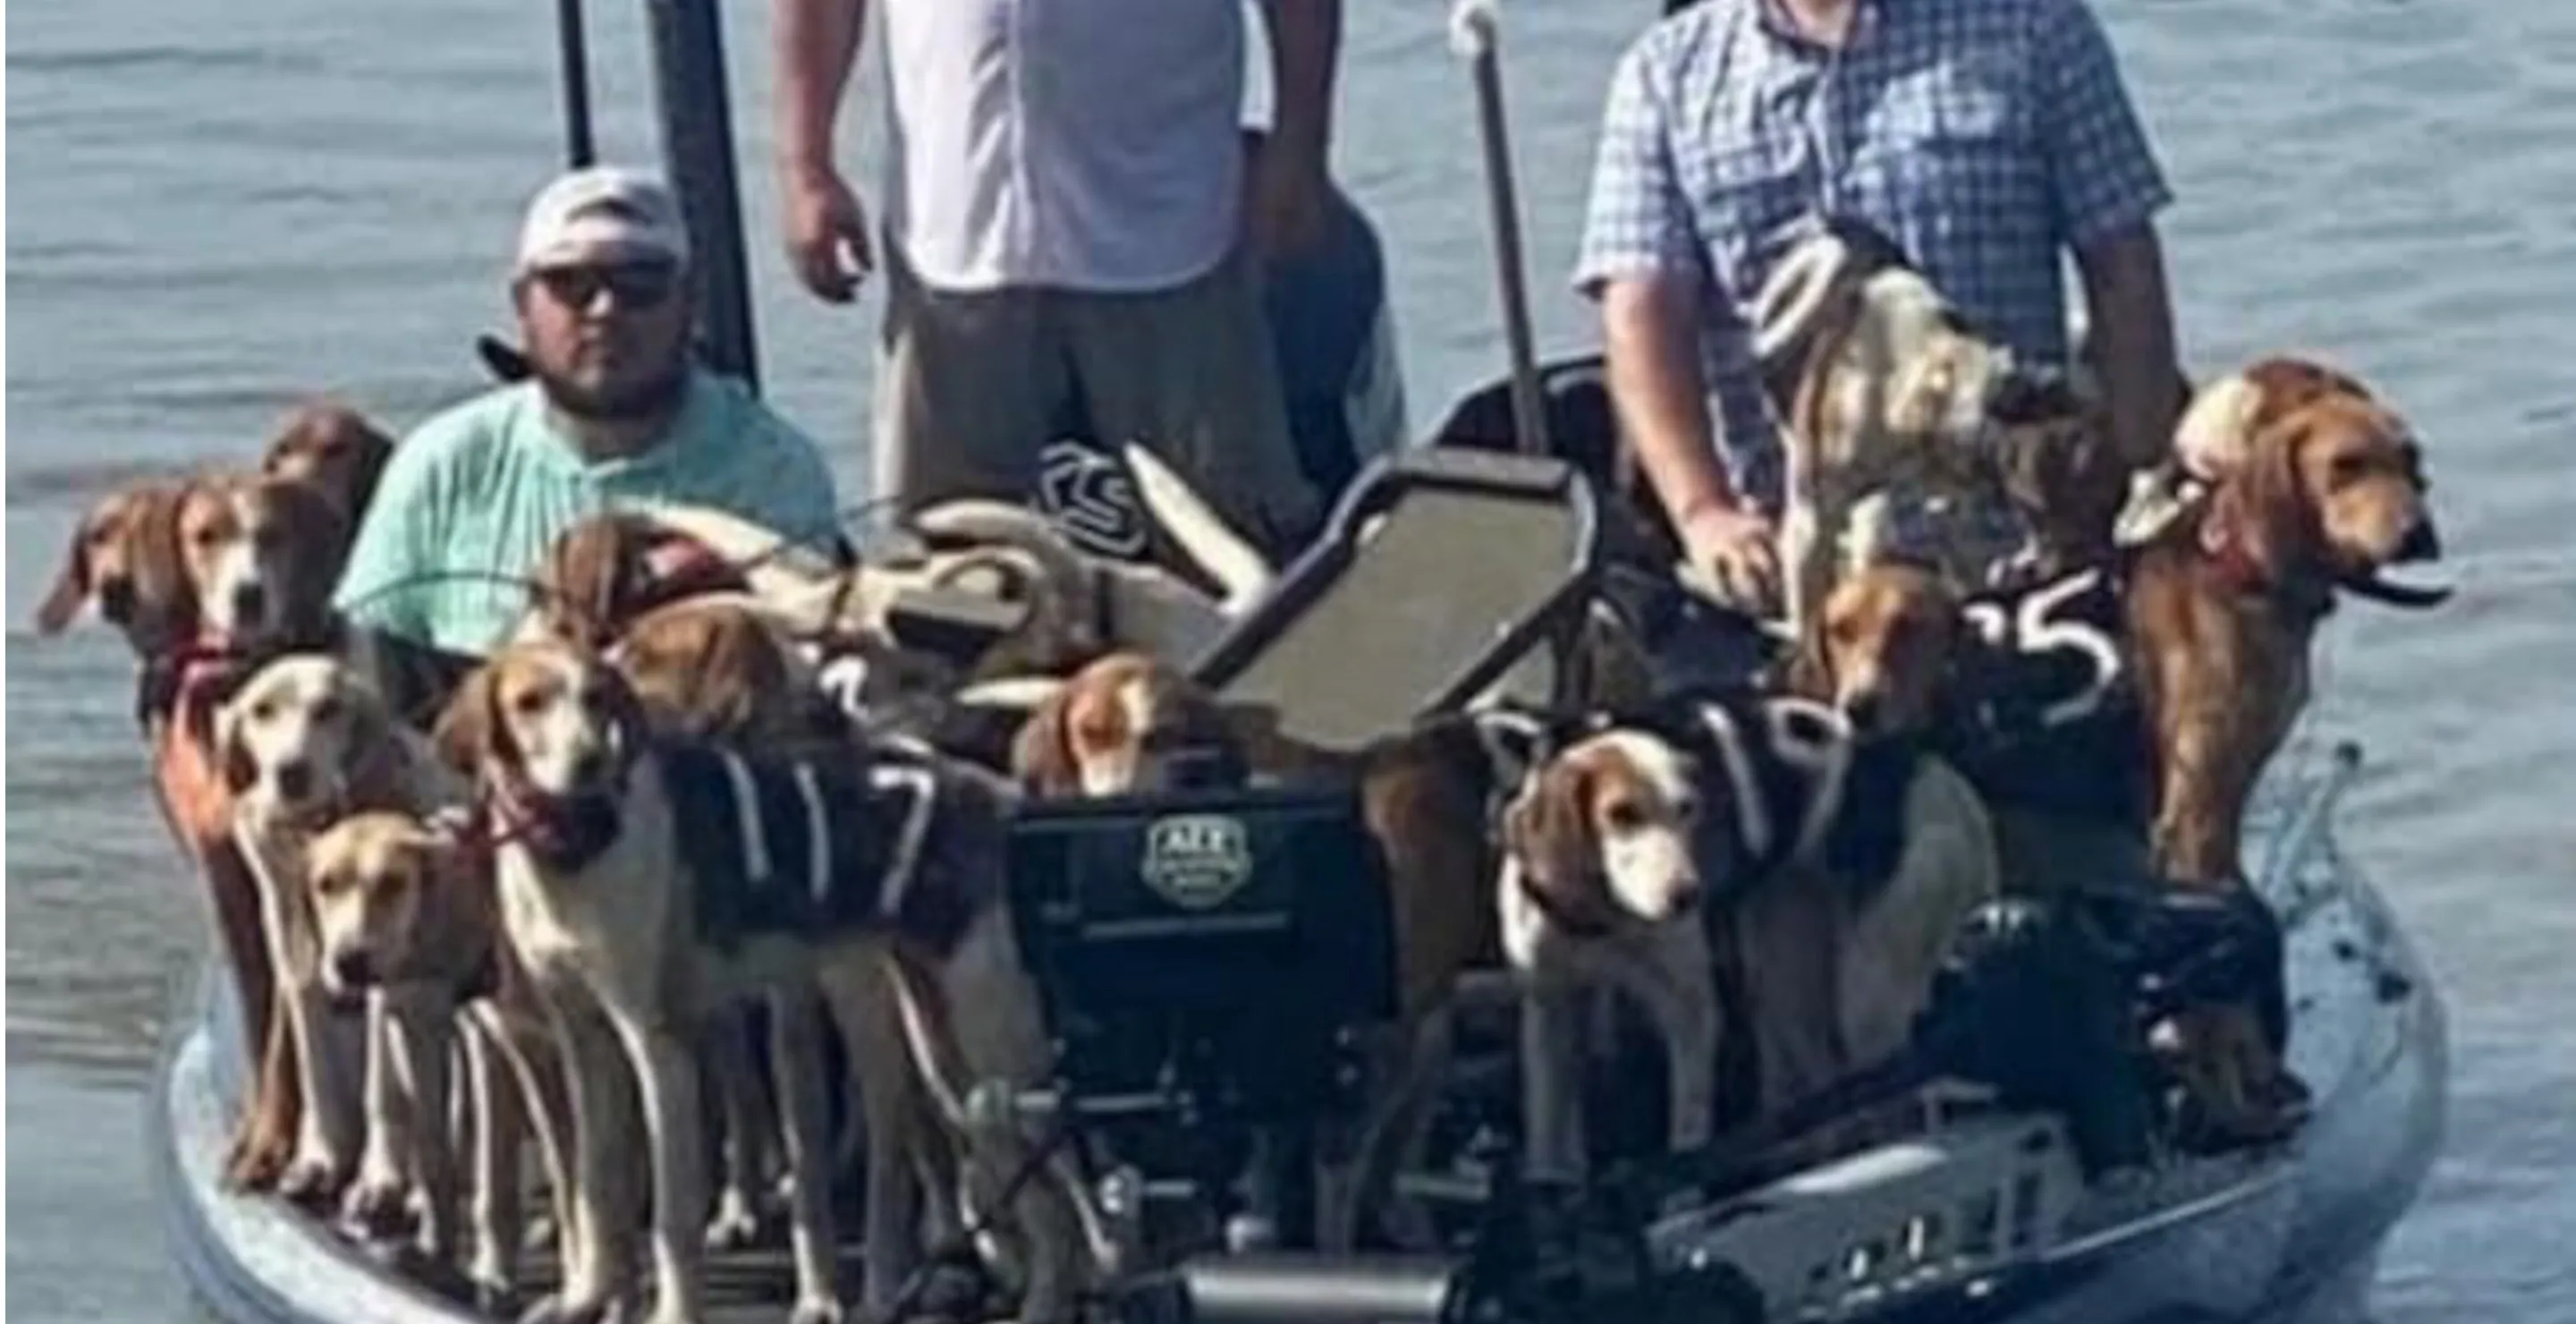 Mississippi Anglers Rescues 38 Hunting Dogs From Drowning In The Middle Of A Lake